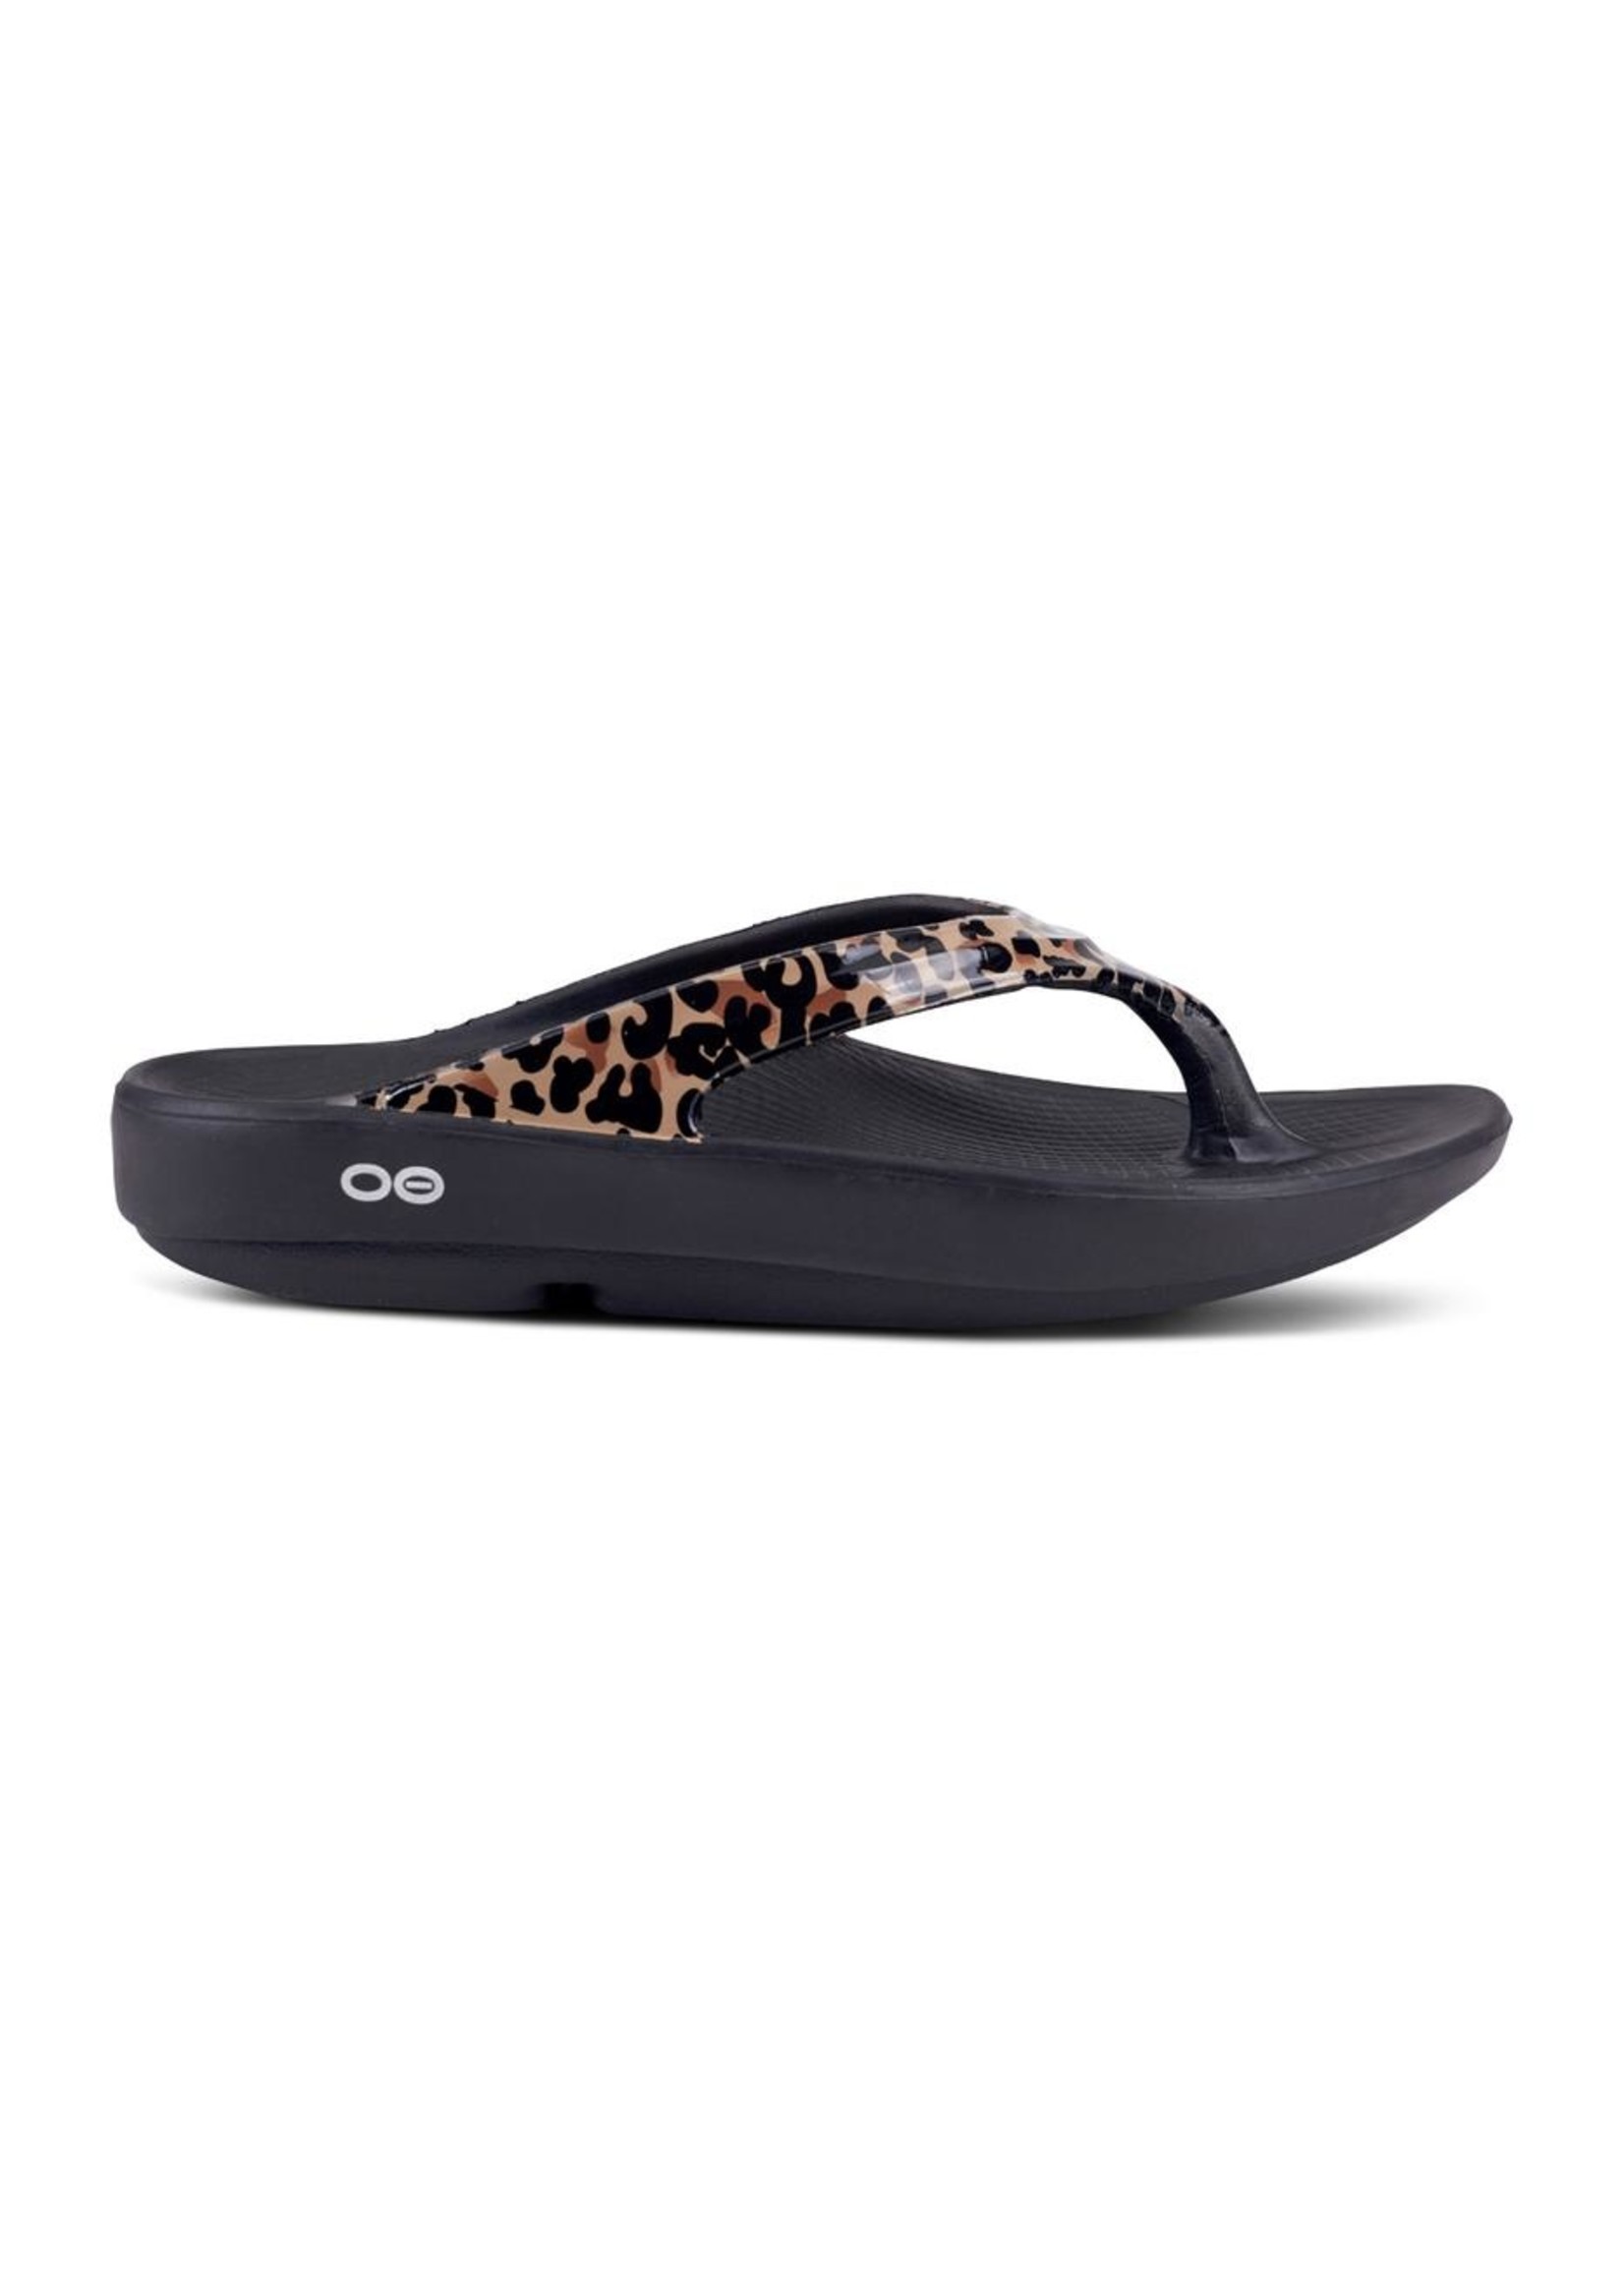 OOFOS Women's OOlala Limited Sandal